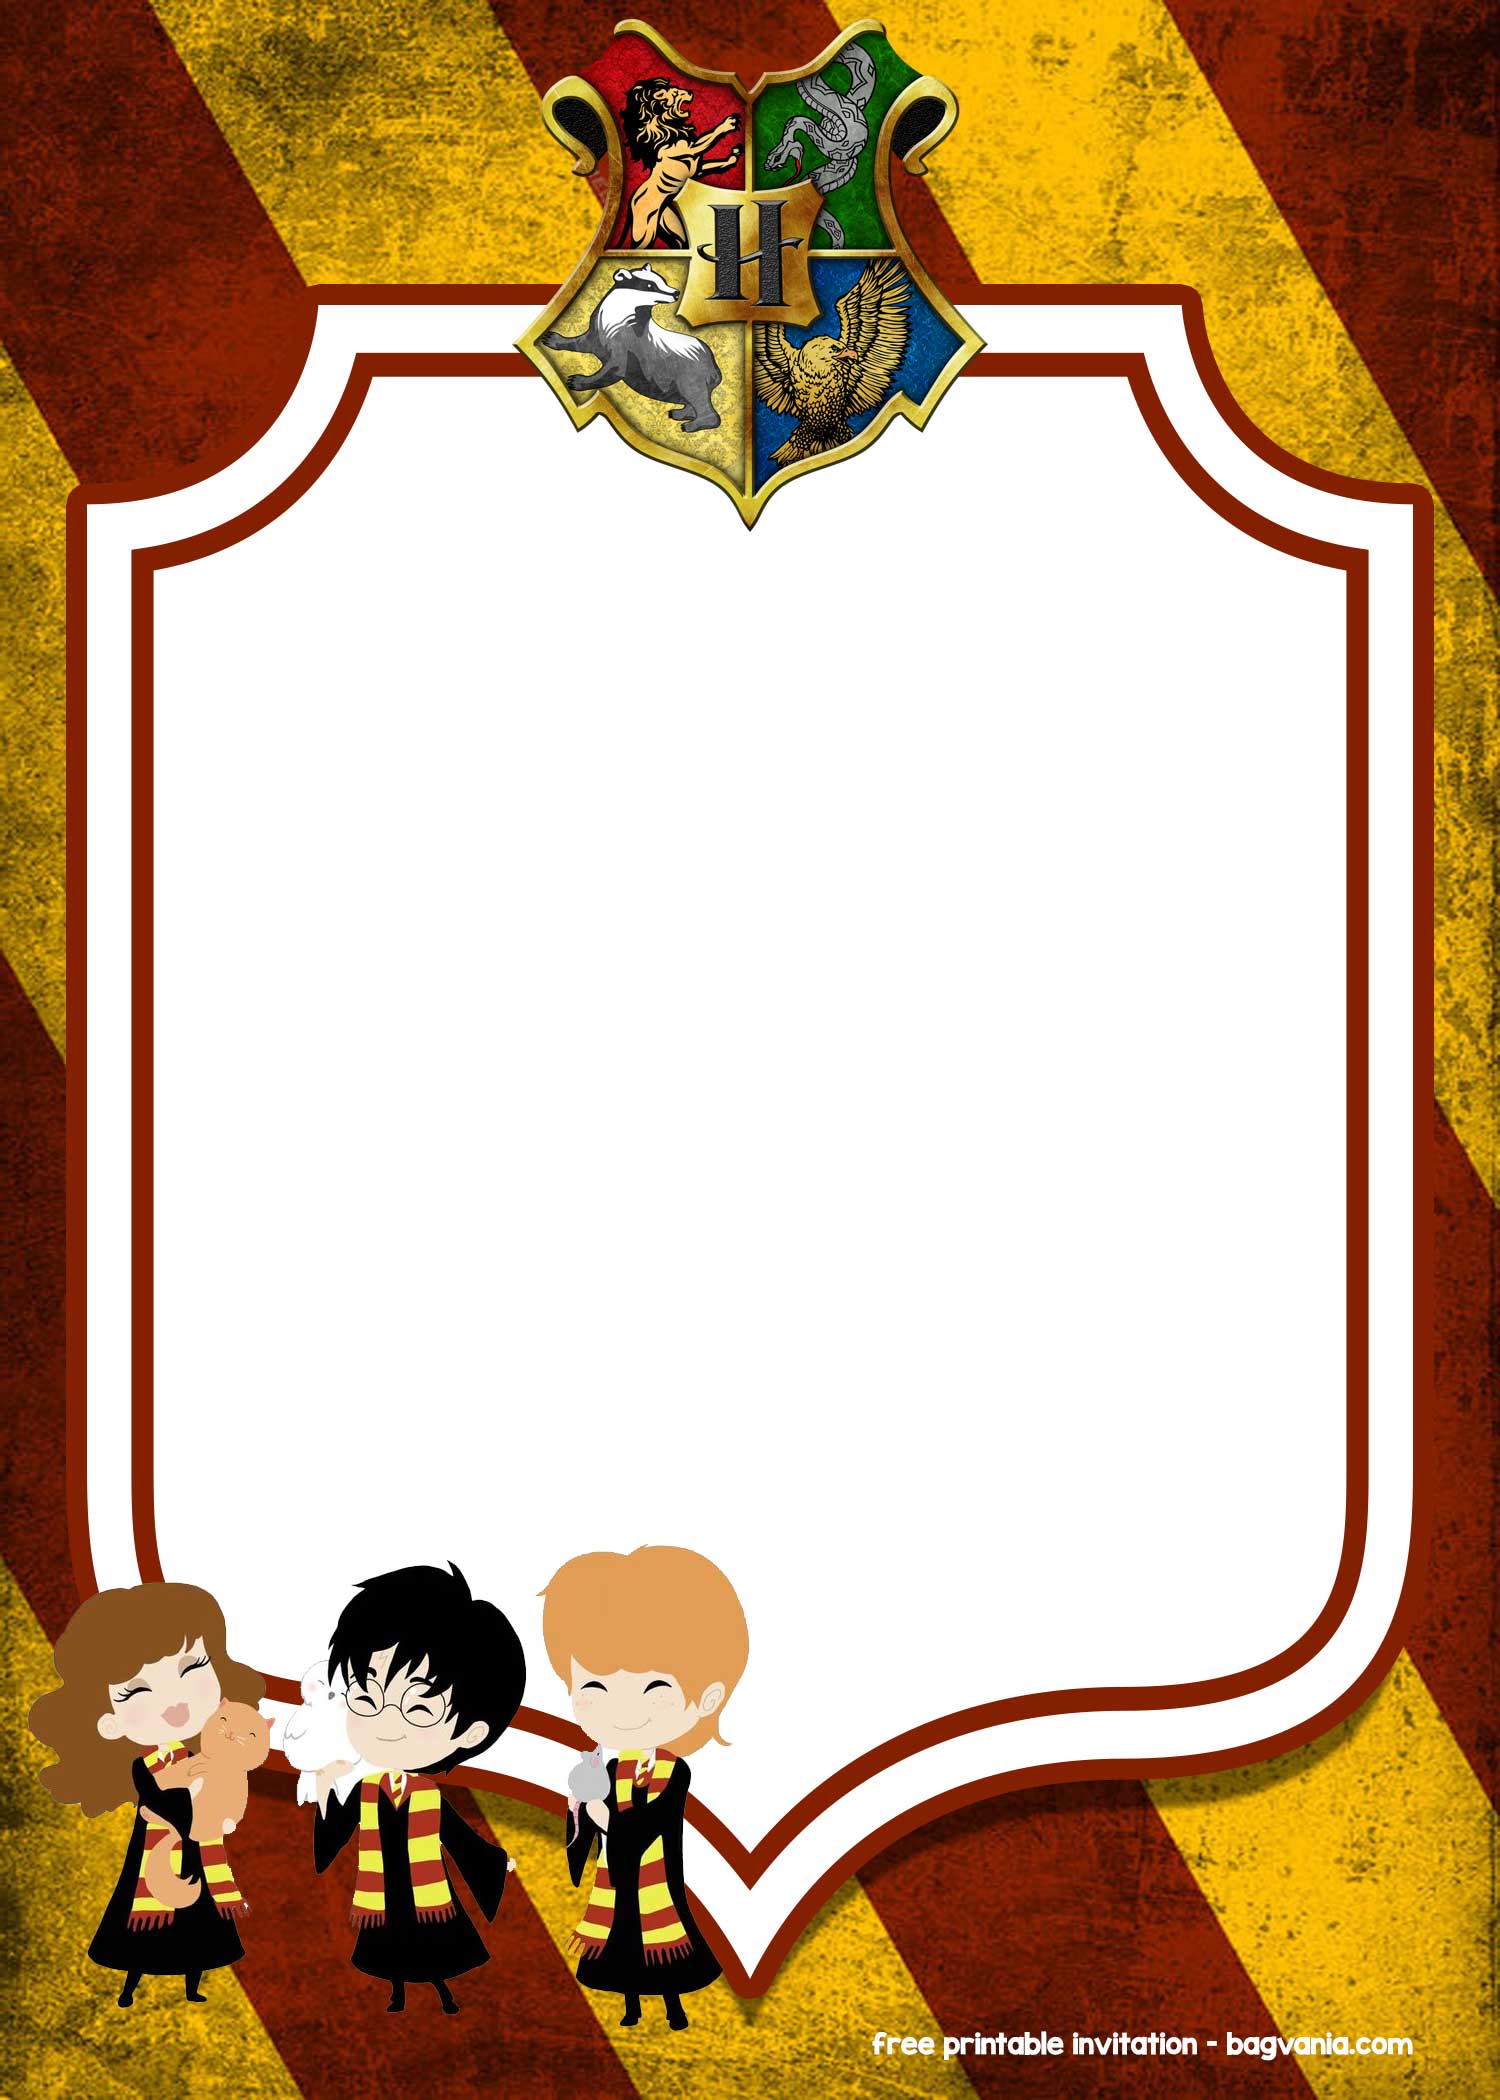 Harry Potter Party Invitations Template